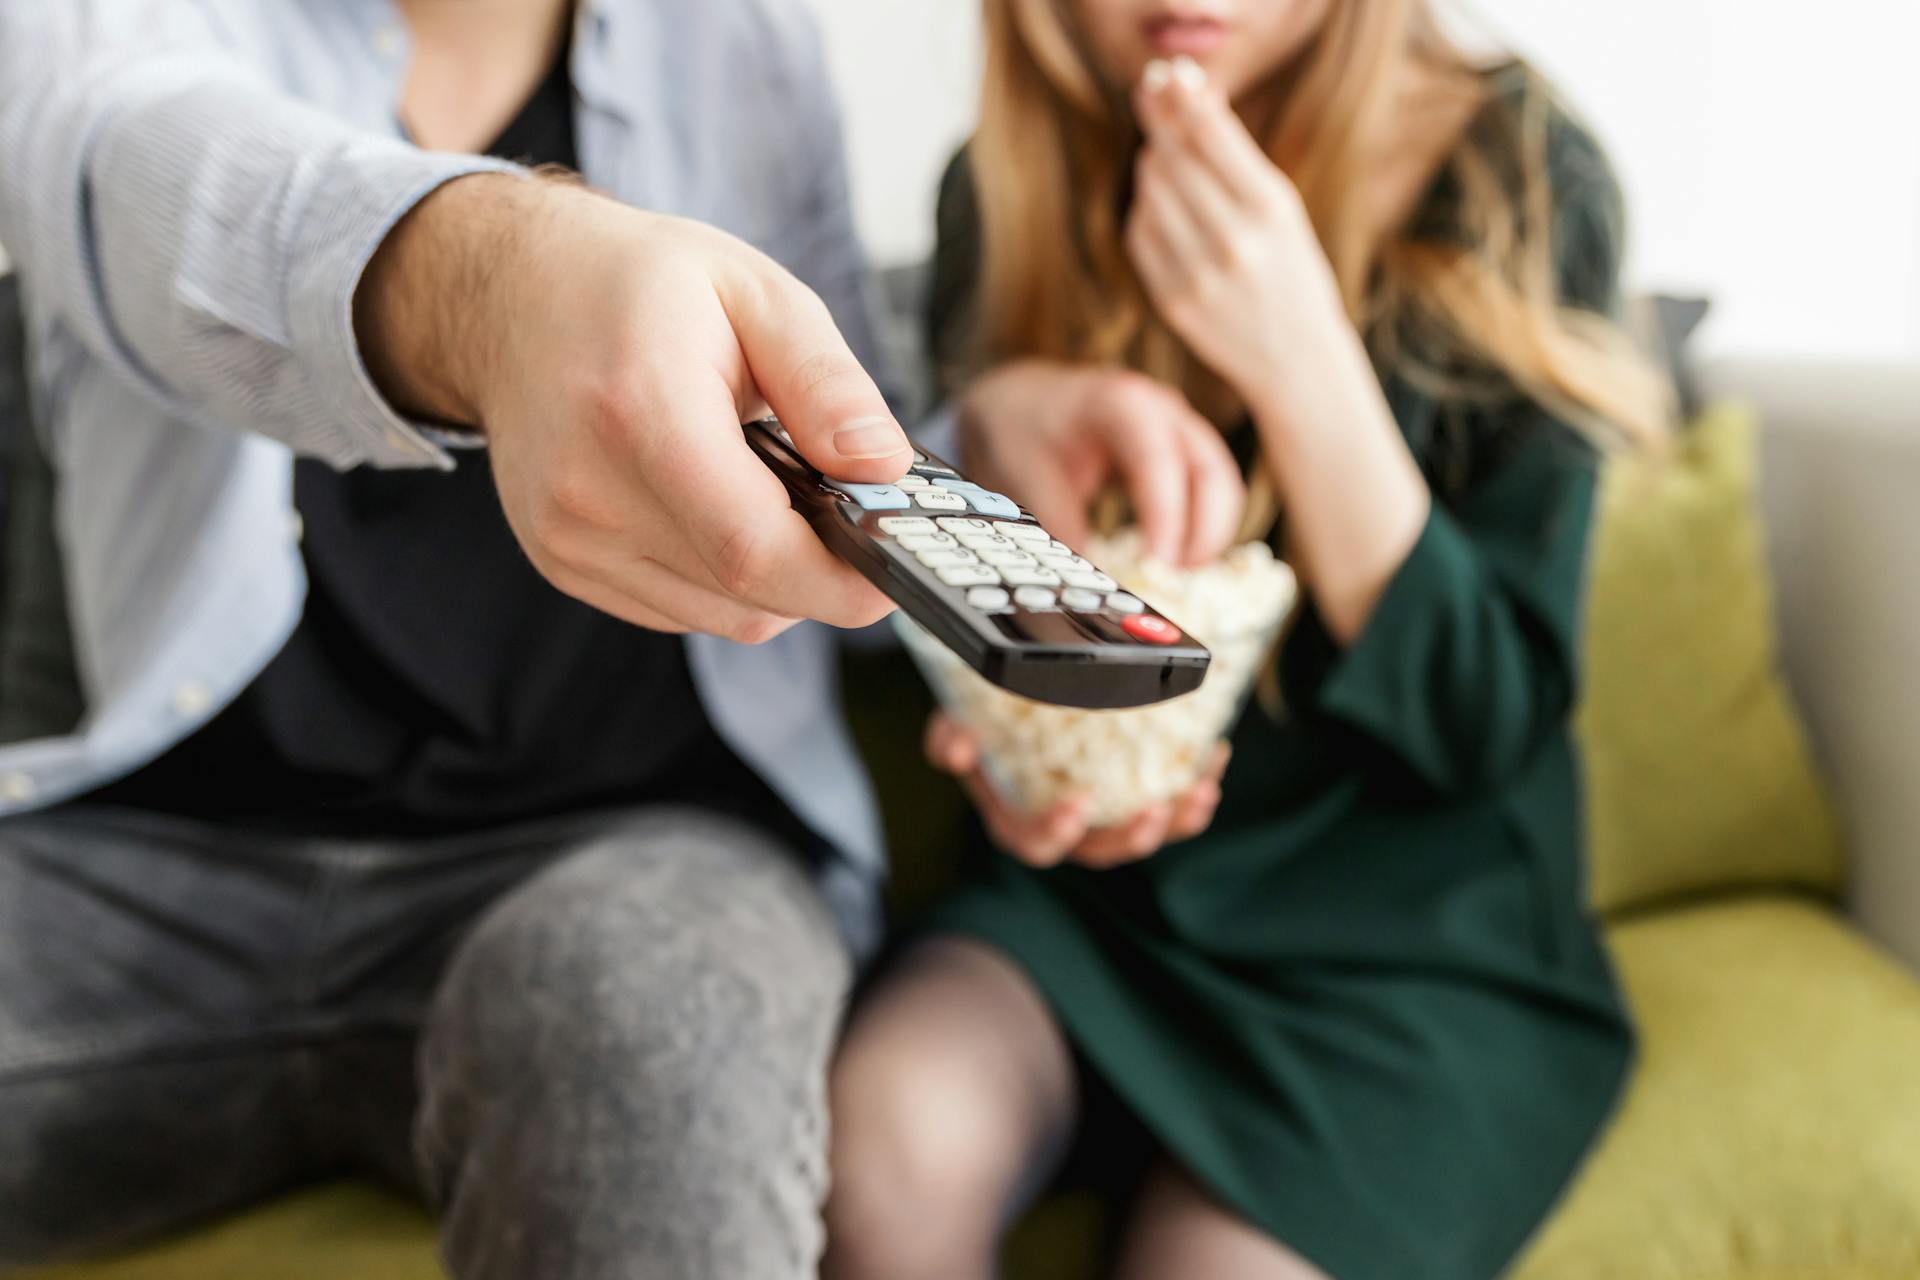 A man holding a TV remote | Source: Pexels